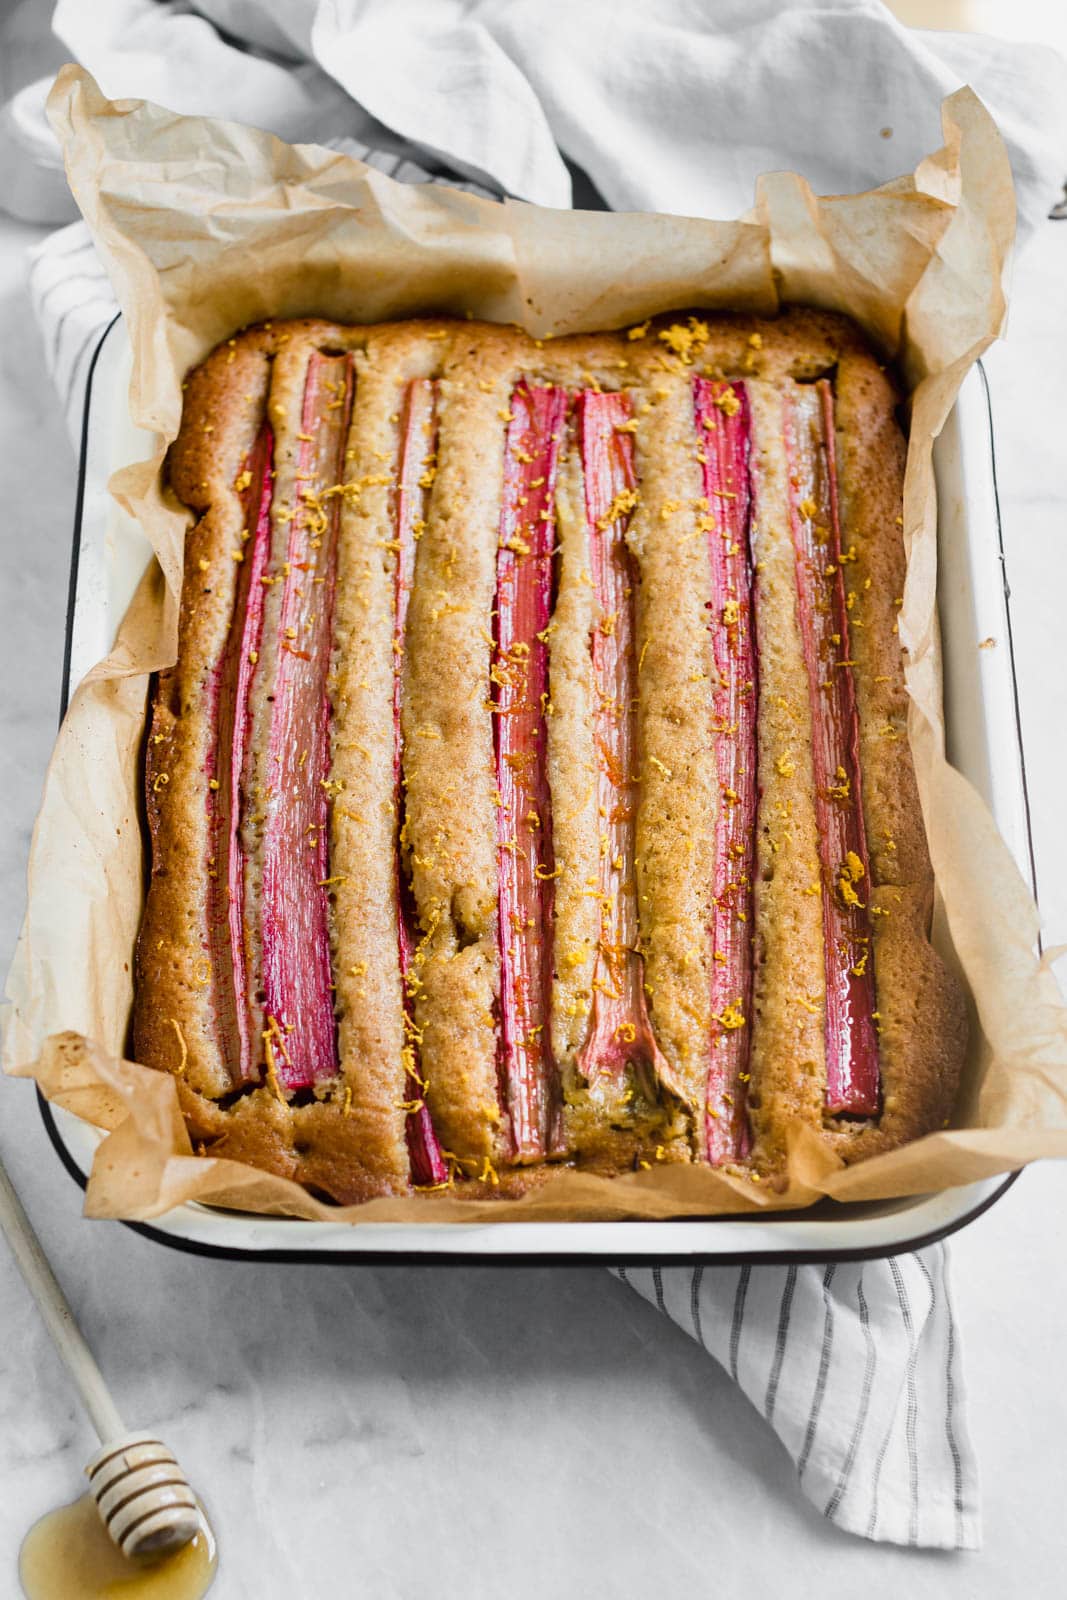 A rustic rhubarb almond honey cake with a hint of orange zest and wildflower honey. A perfect one-bowl snack cake ready in just 45 minutes!